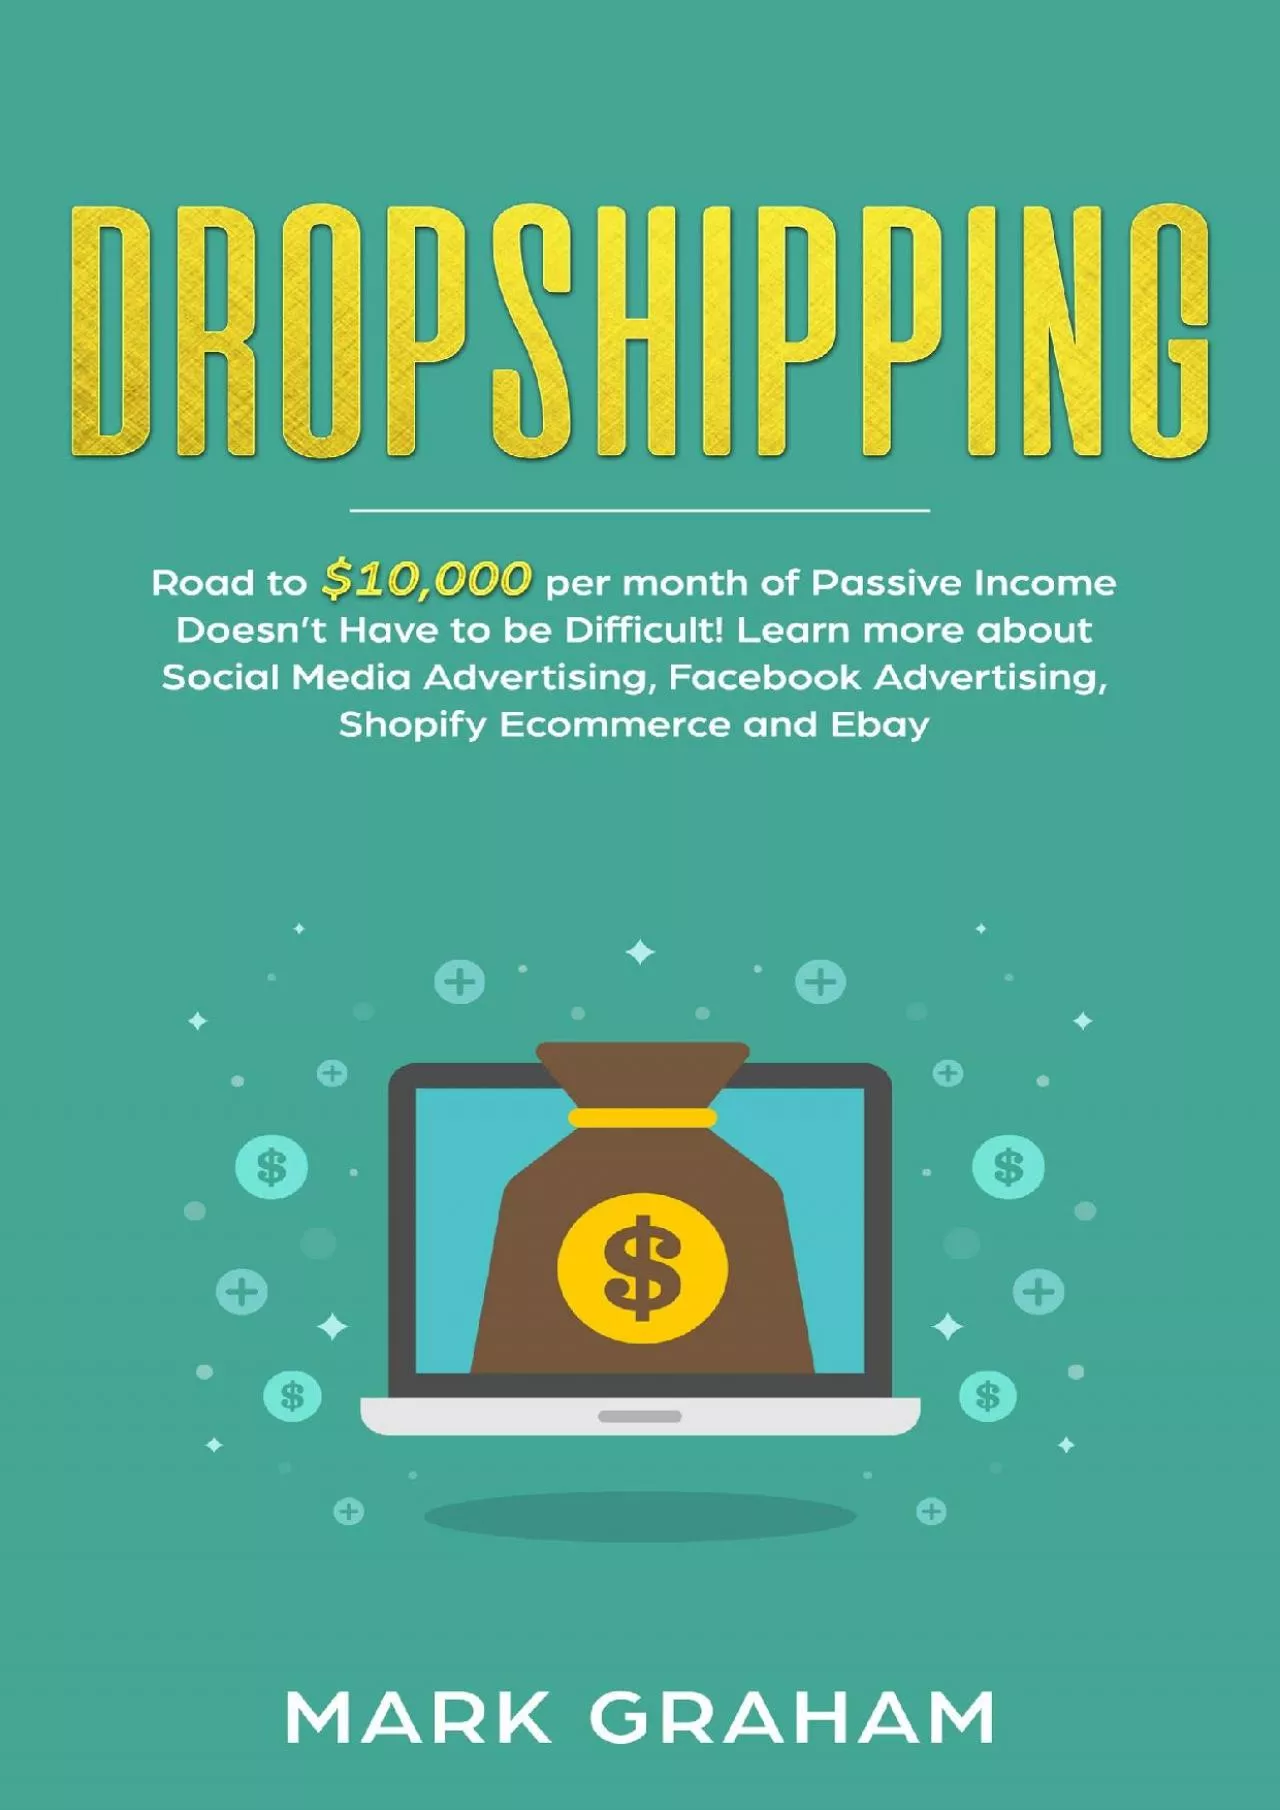 Dropshipping Road to 10,000 per month of Passive Income Doesn’t Have to be Difficult